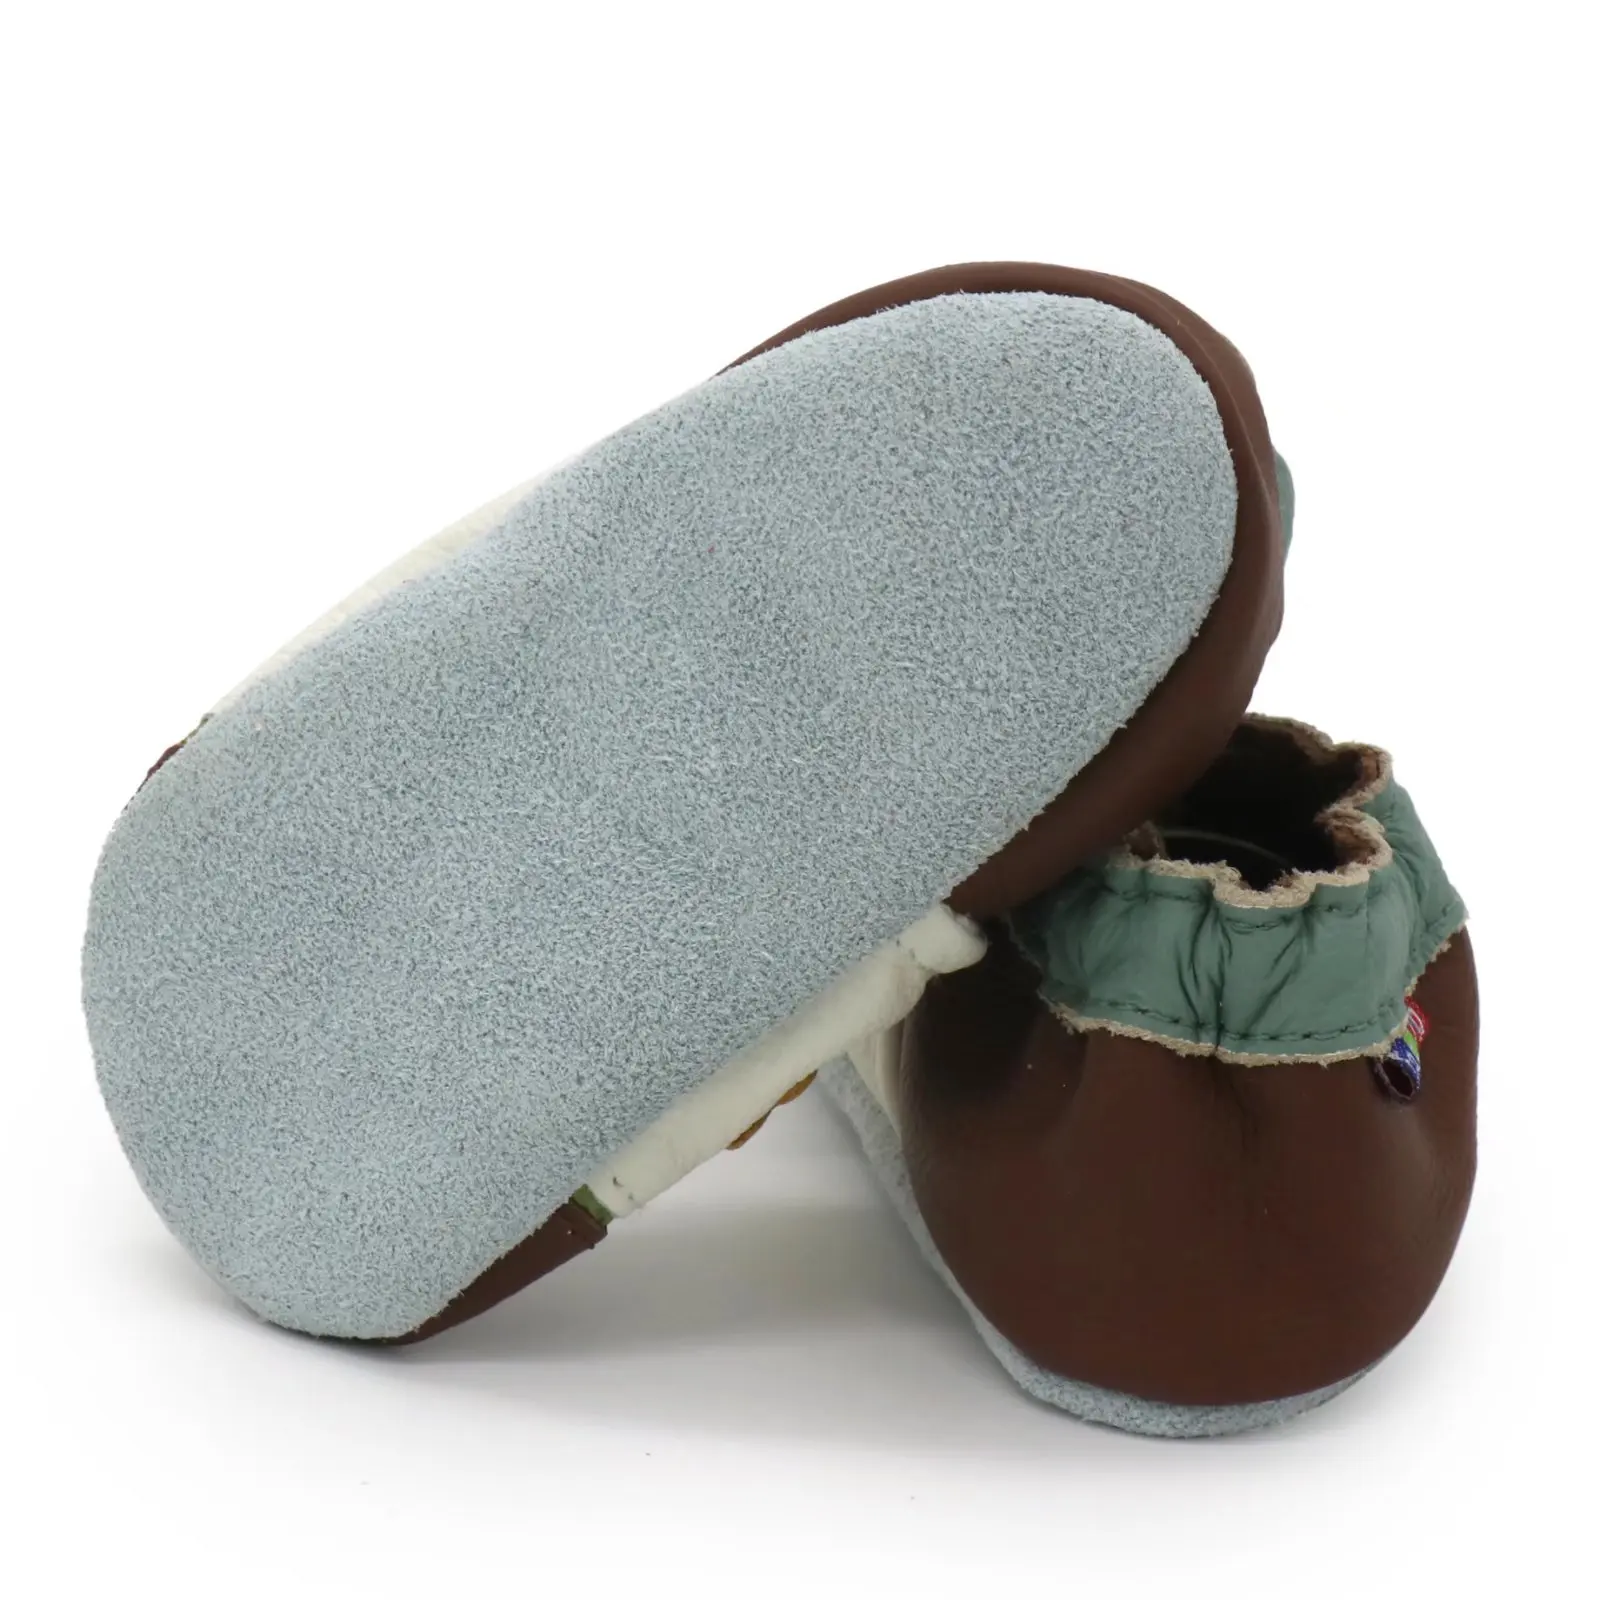 Carozoo Soft Leather Shoes Baby Boy Girl Infant Shoe Slippers New Style First Walker Leather Skid-Proof Kids Shoes